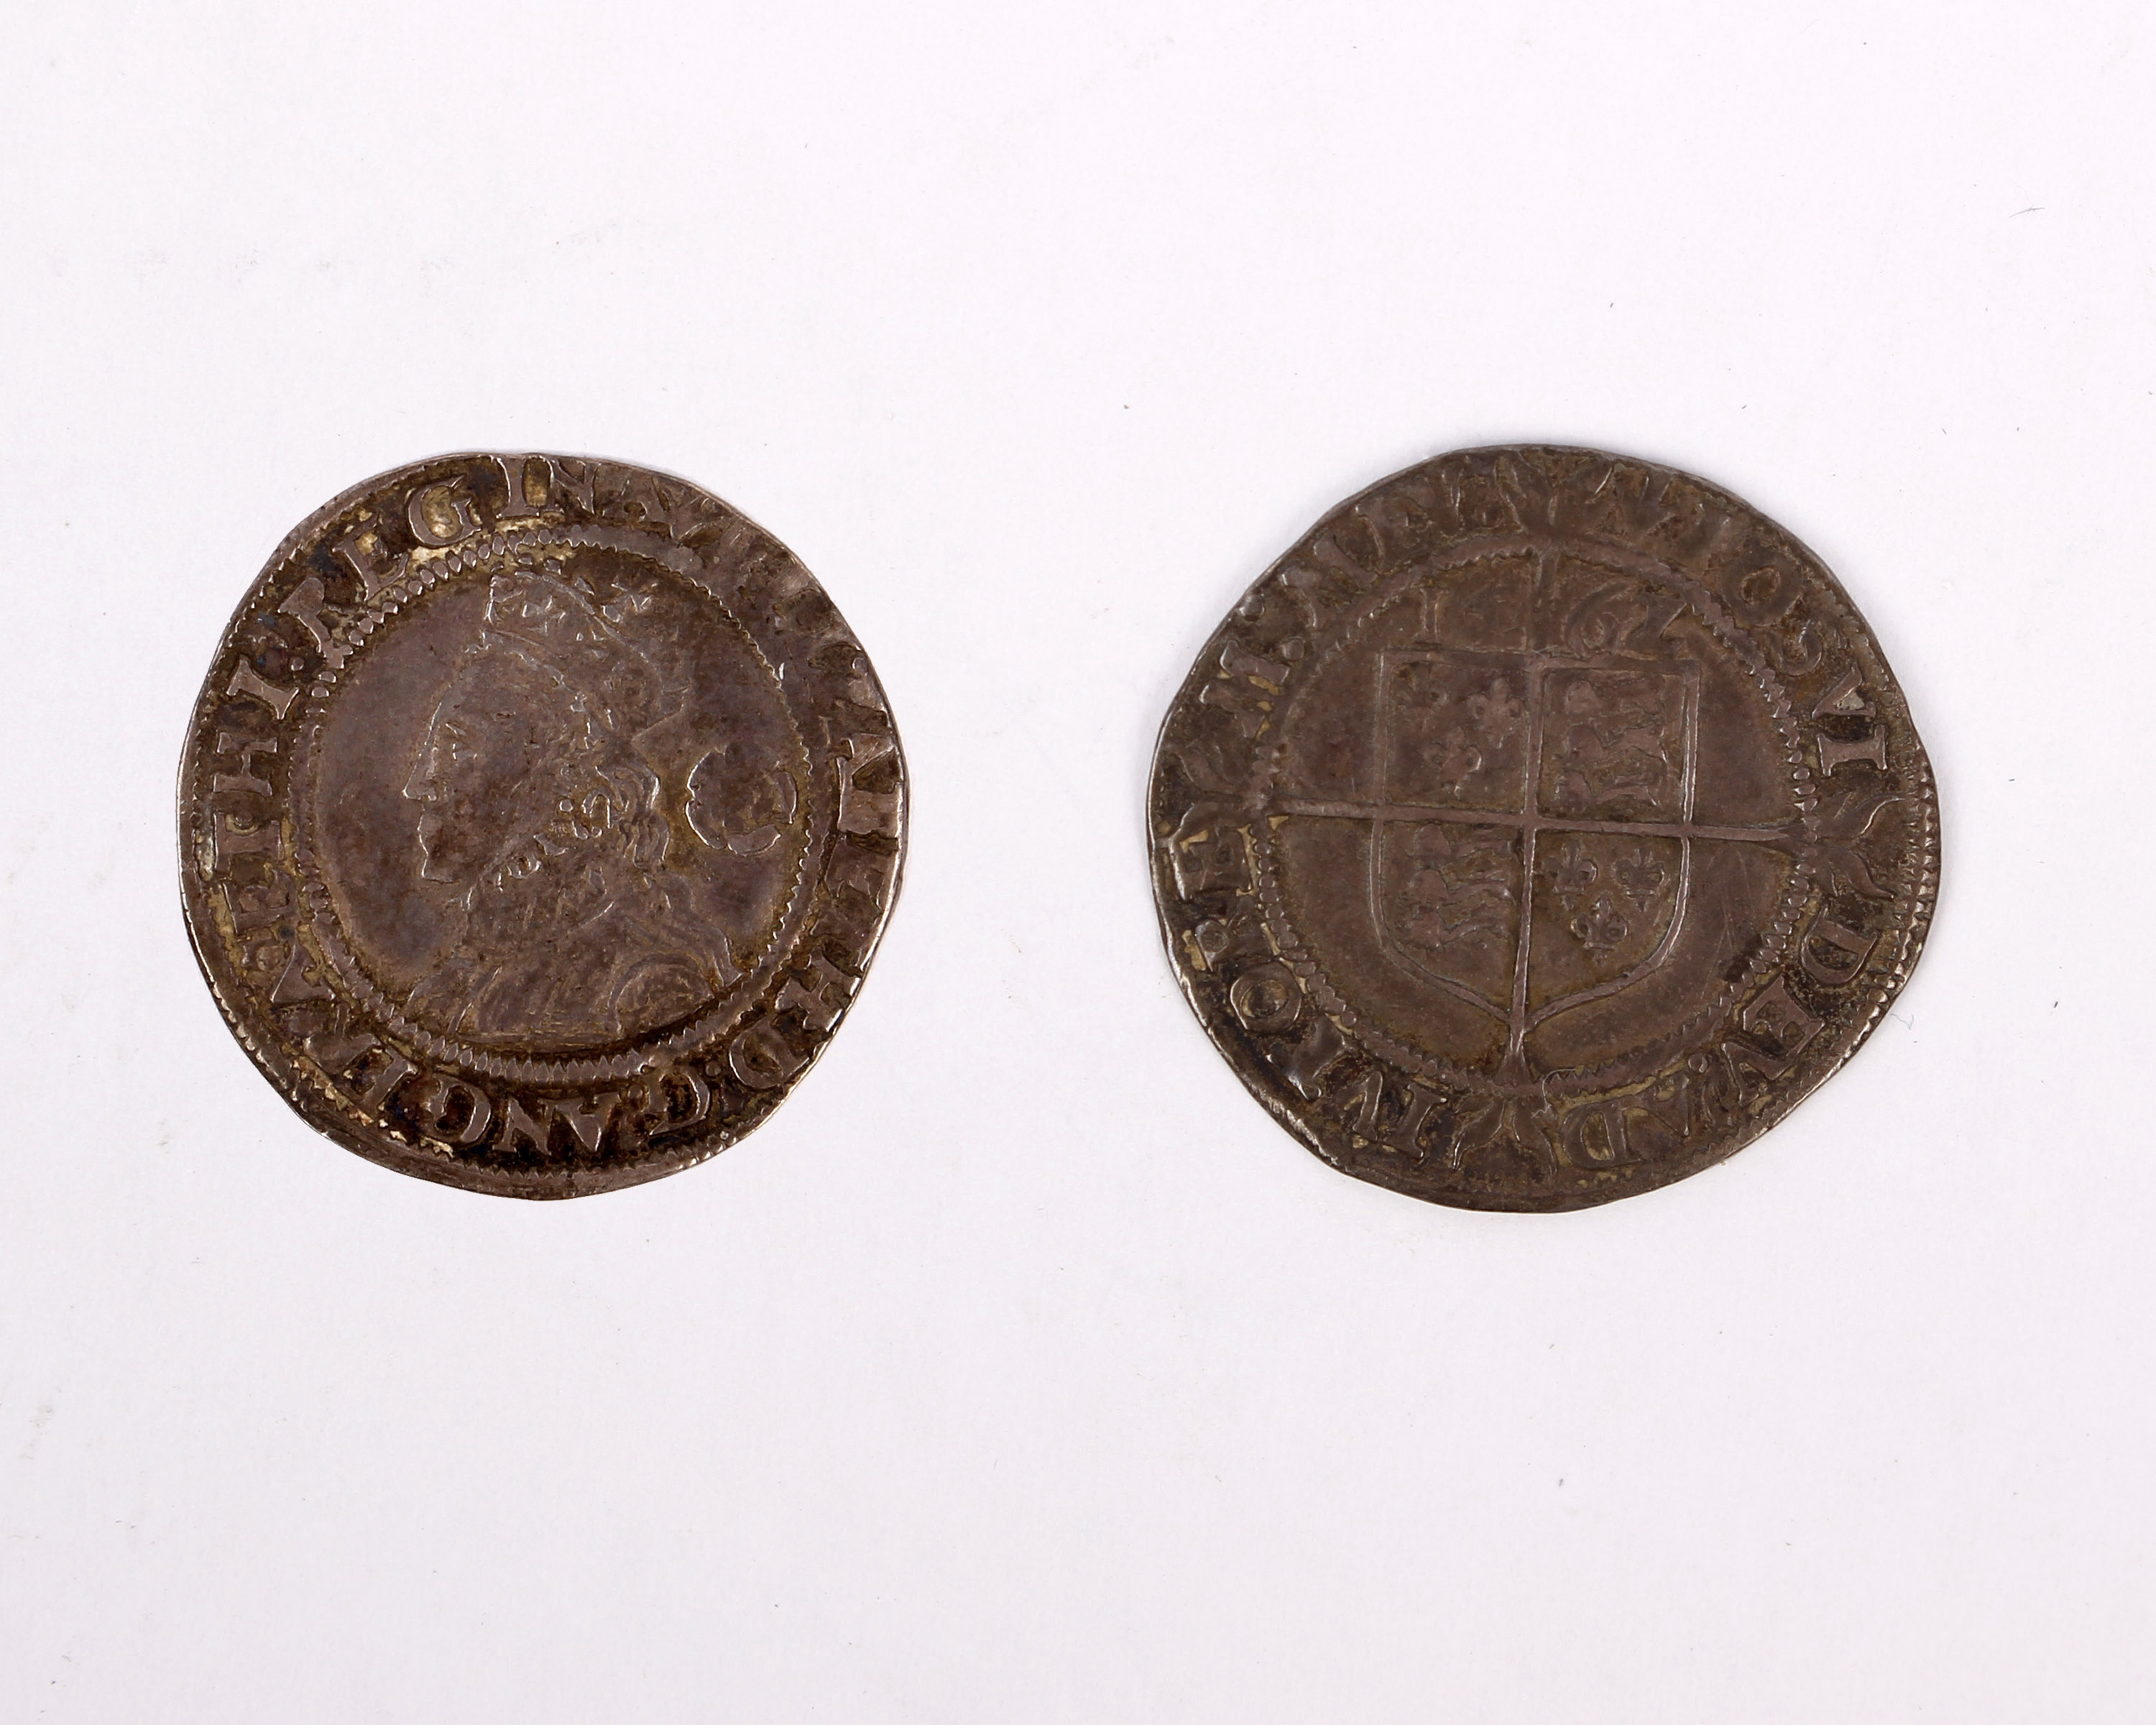 A 1562/1 RARE Threepence Elizabeth I Silver hammered 3d three pence coin 1562 over 1 GVF VF.